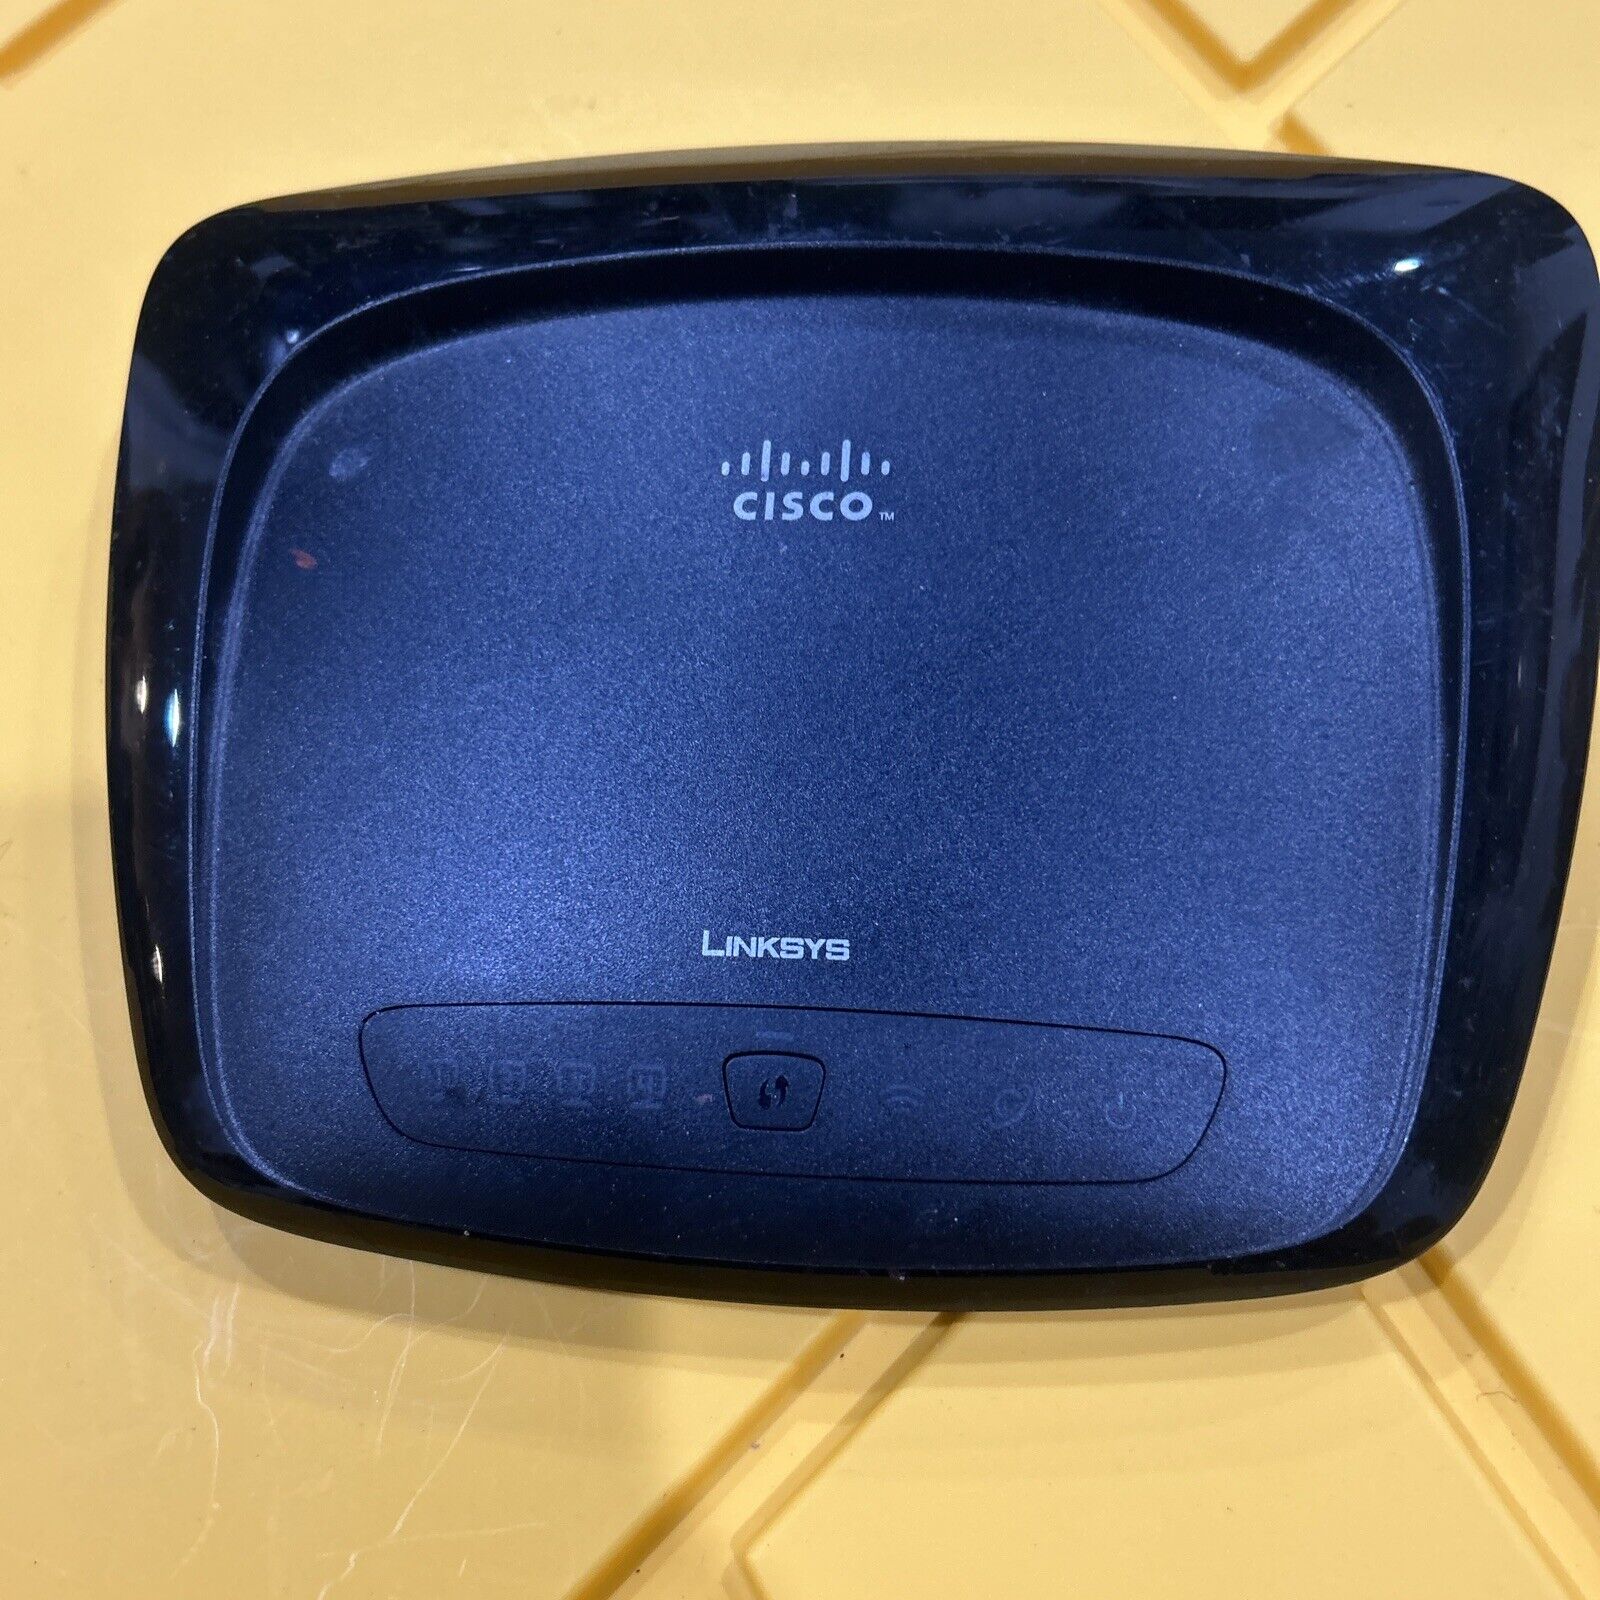 Cisco Linksys WRT54G2 v1 54 Mbps 4-Port 10/100 Wireless G Router No Power Cord